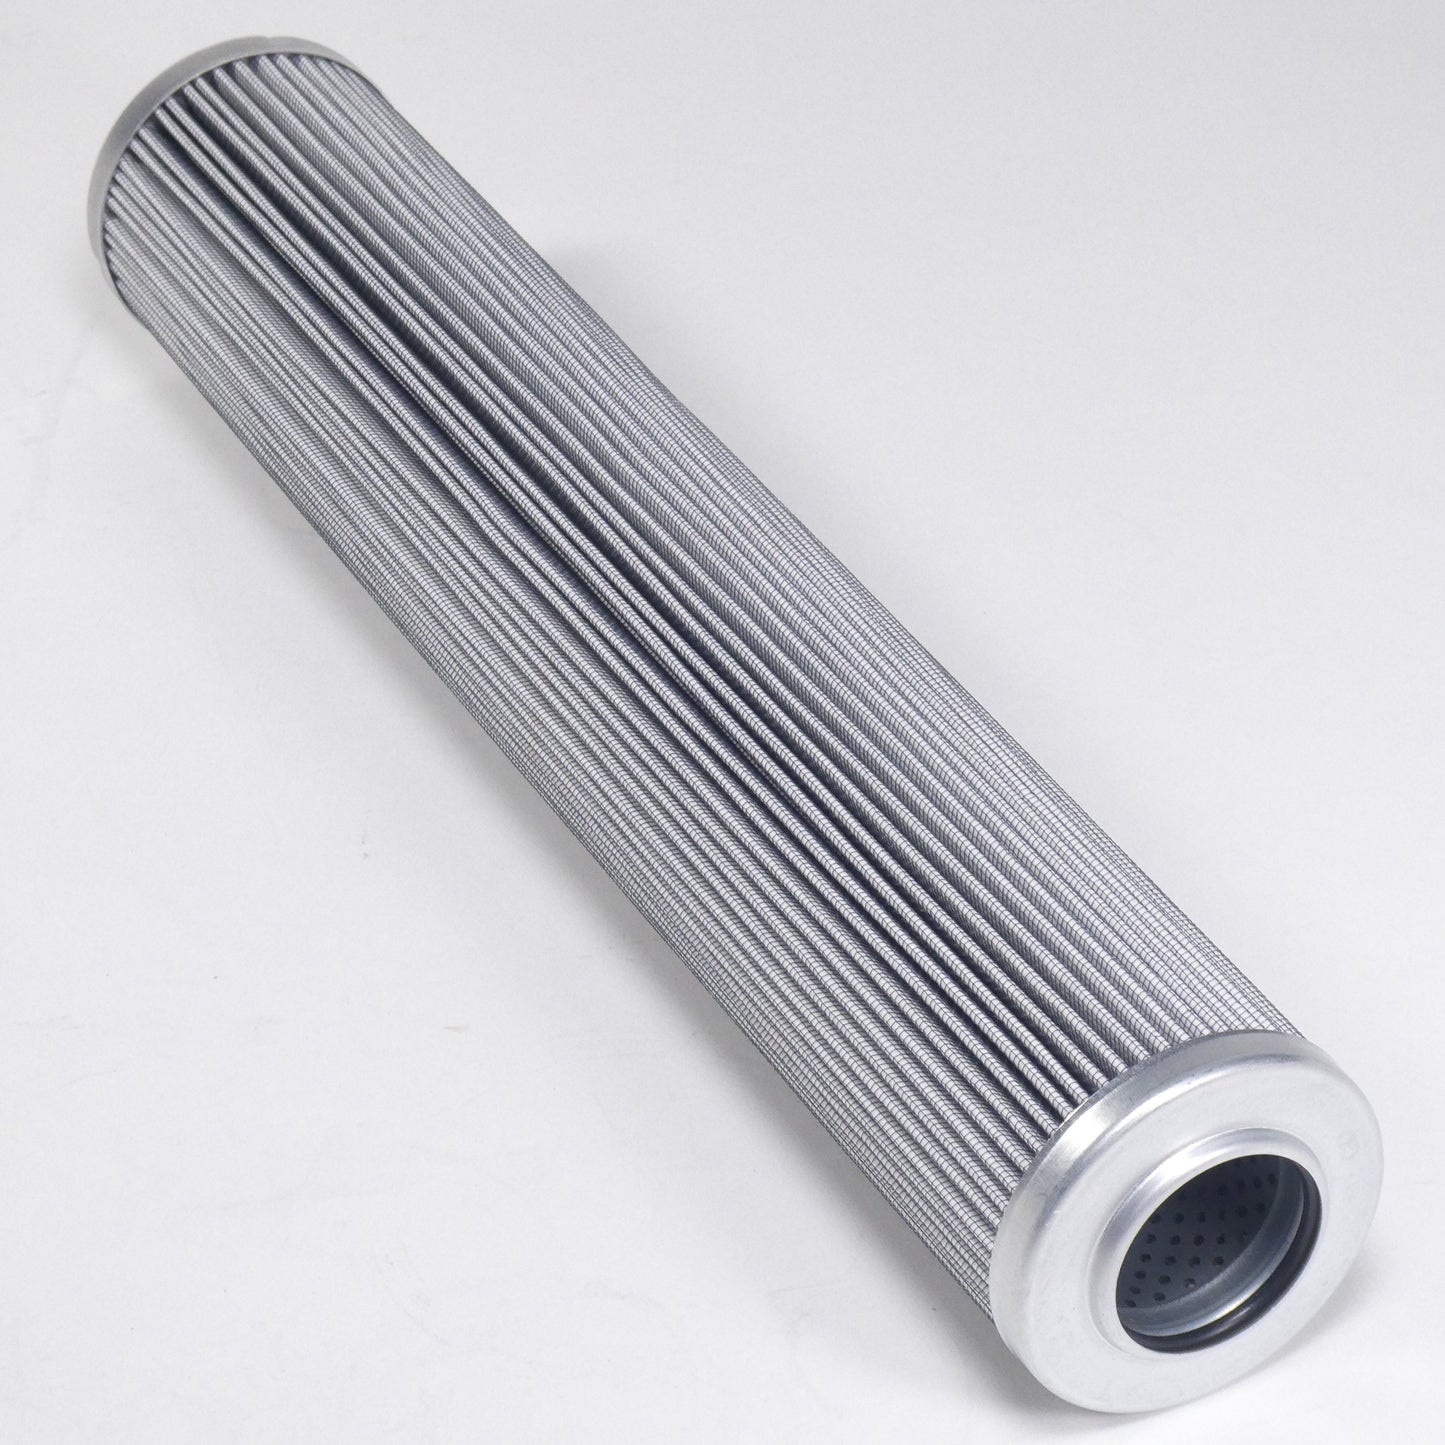 Hydrafil Replacement Filter Element for Wix 51709